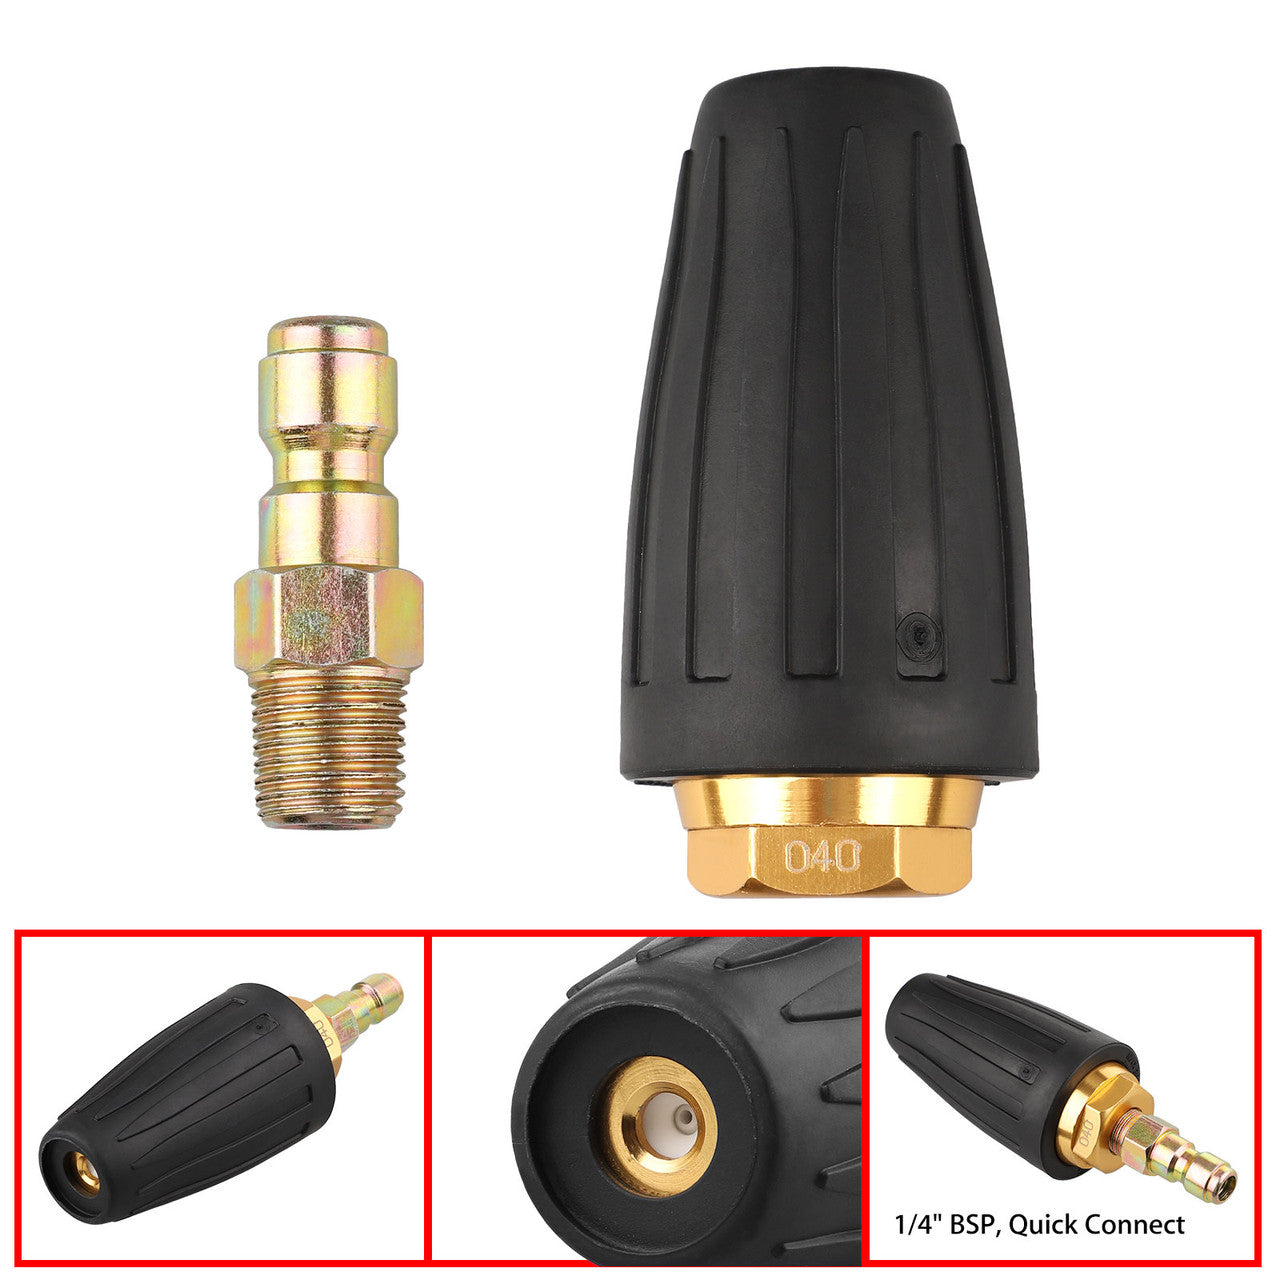 1/4 inch Quick-Connect Plug Spray Nozzle 3000 PSI 3GPM for High Pressure Water Washer Gun, 2Pcs